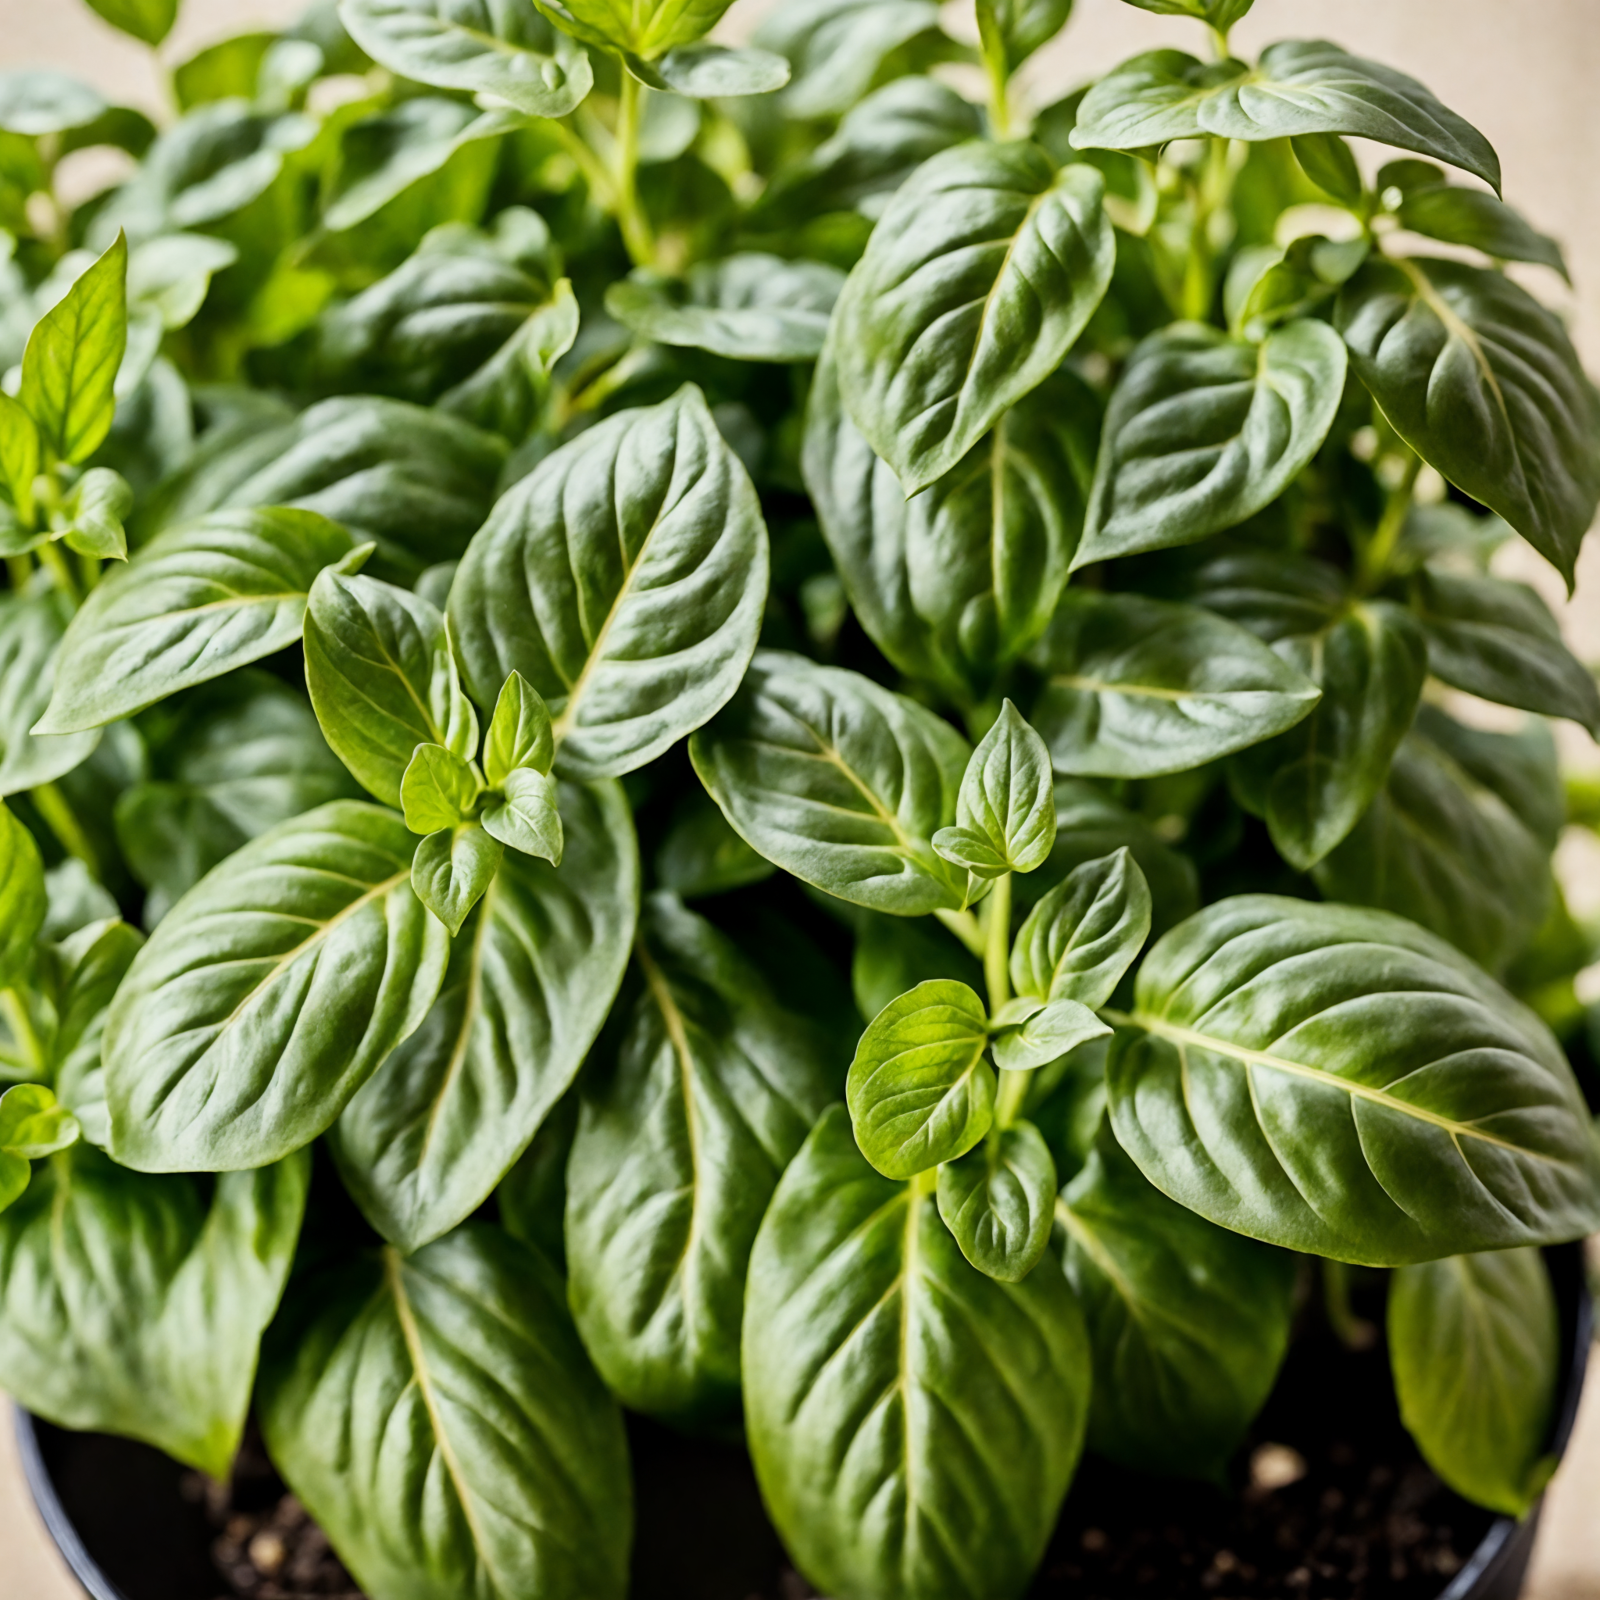 Potted Ocimum basilicum (basil) with lush leaves in a bowl, clear indoor lighting, dark background.